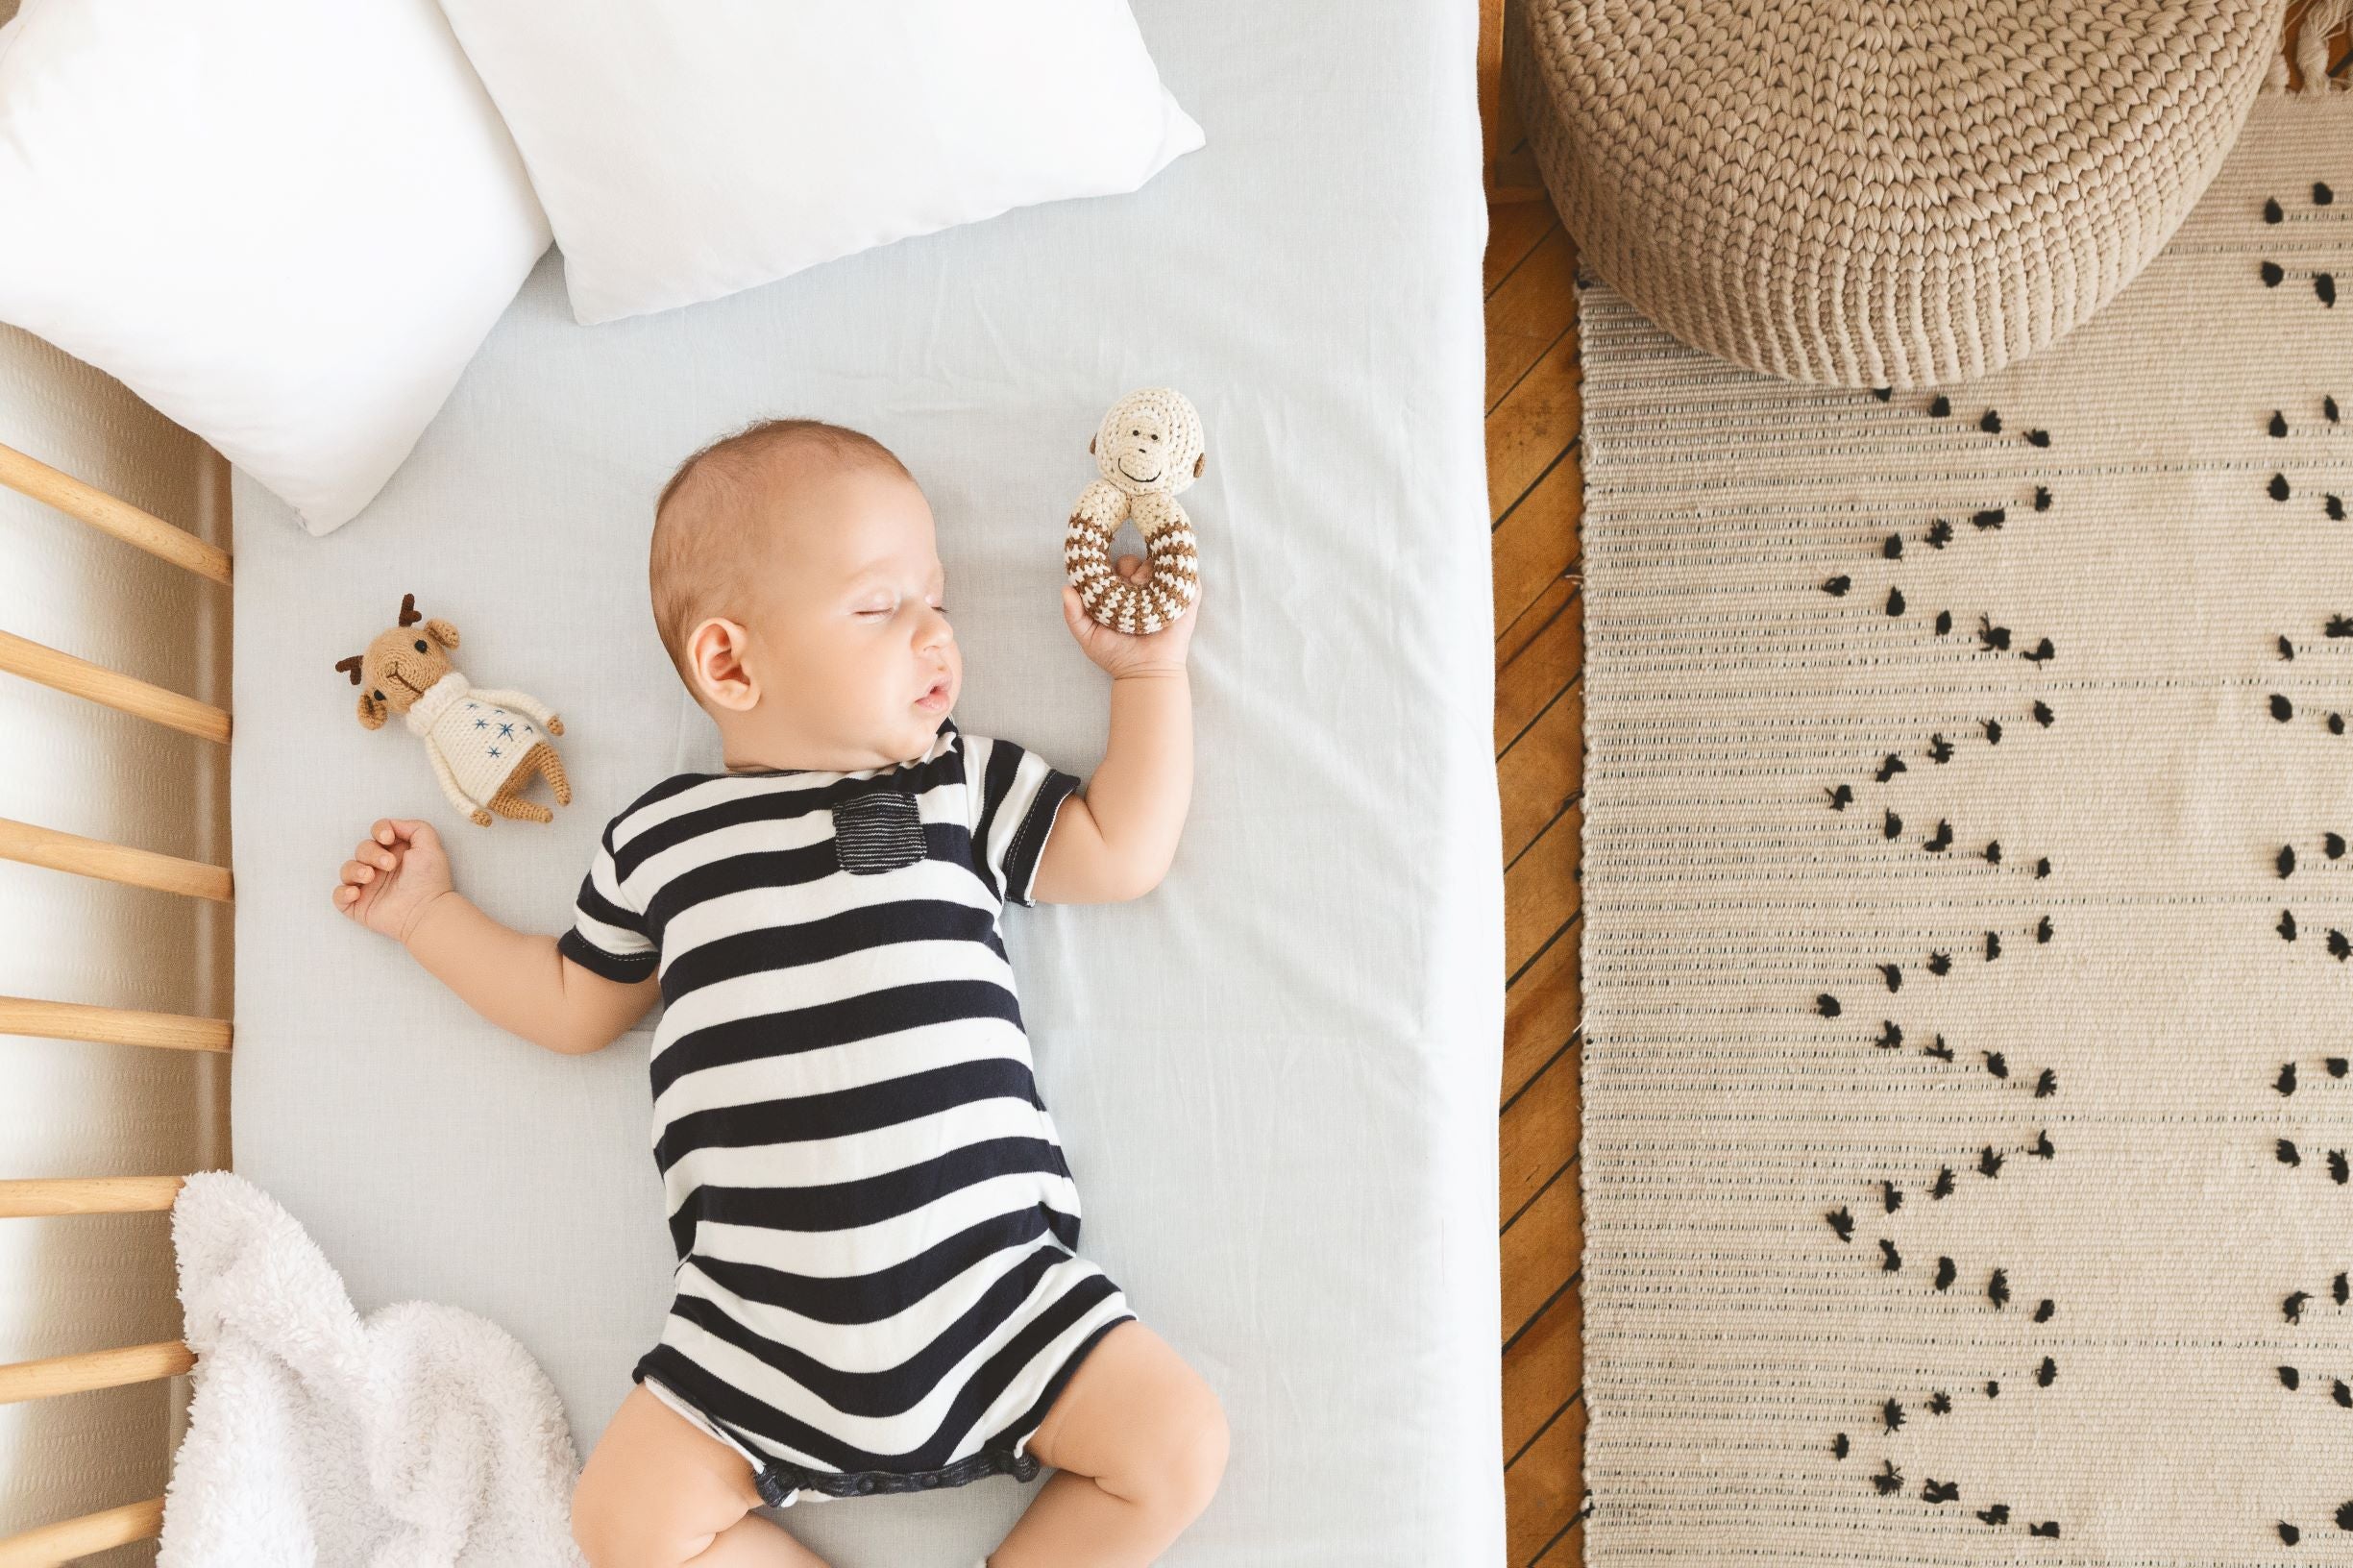 Sleeping baby in a striped onesie on a crib.